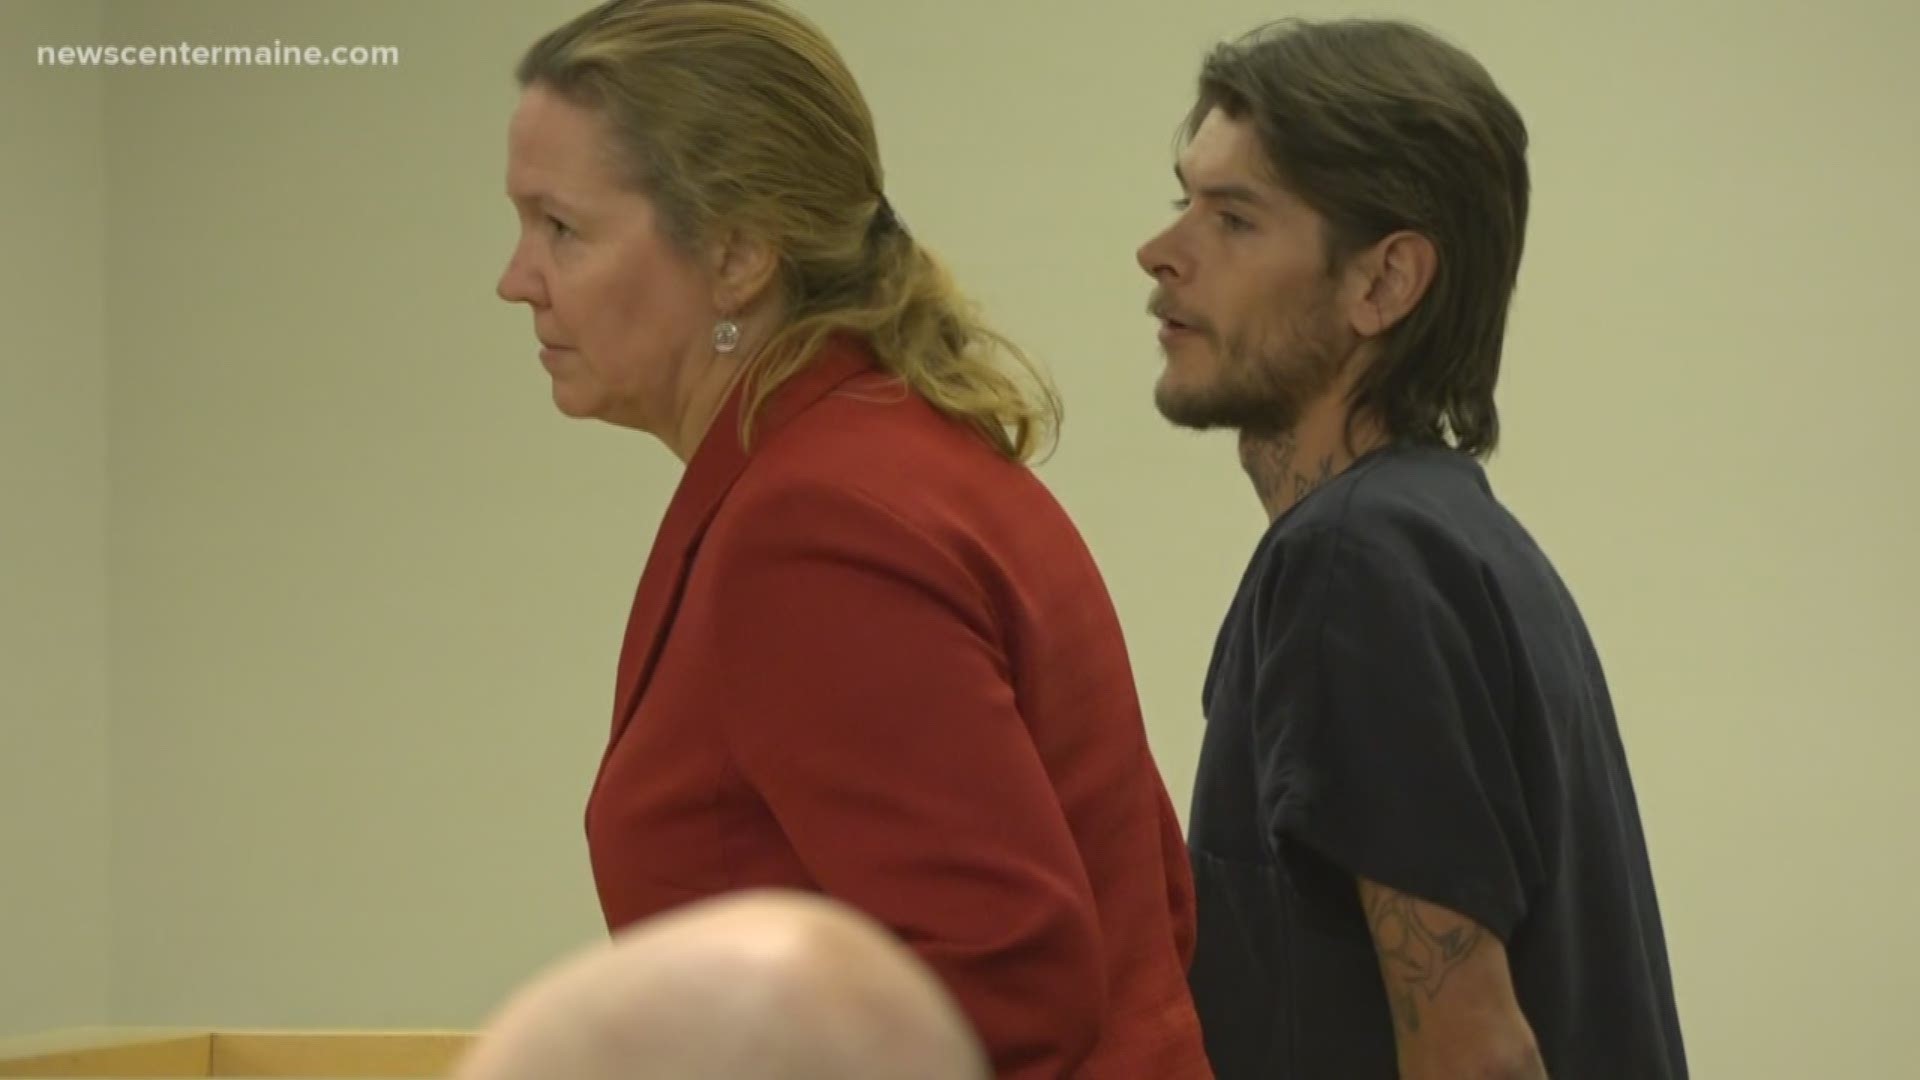 Donald Galleck, the man accused of beating Donald Galleck of Bangor to death, pleaded not guilty Tuesday.